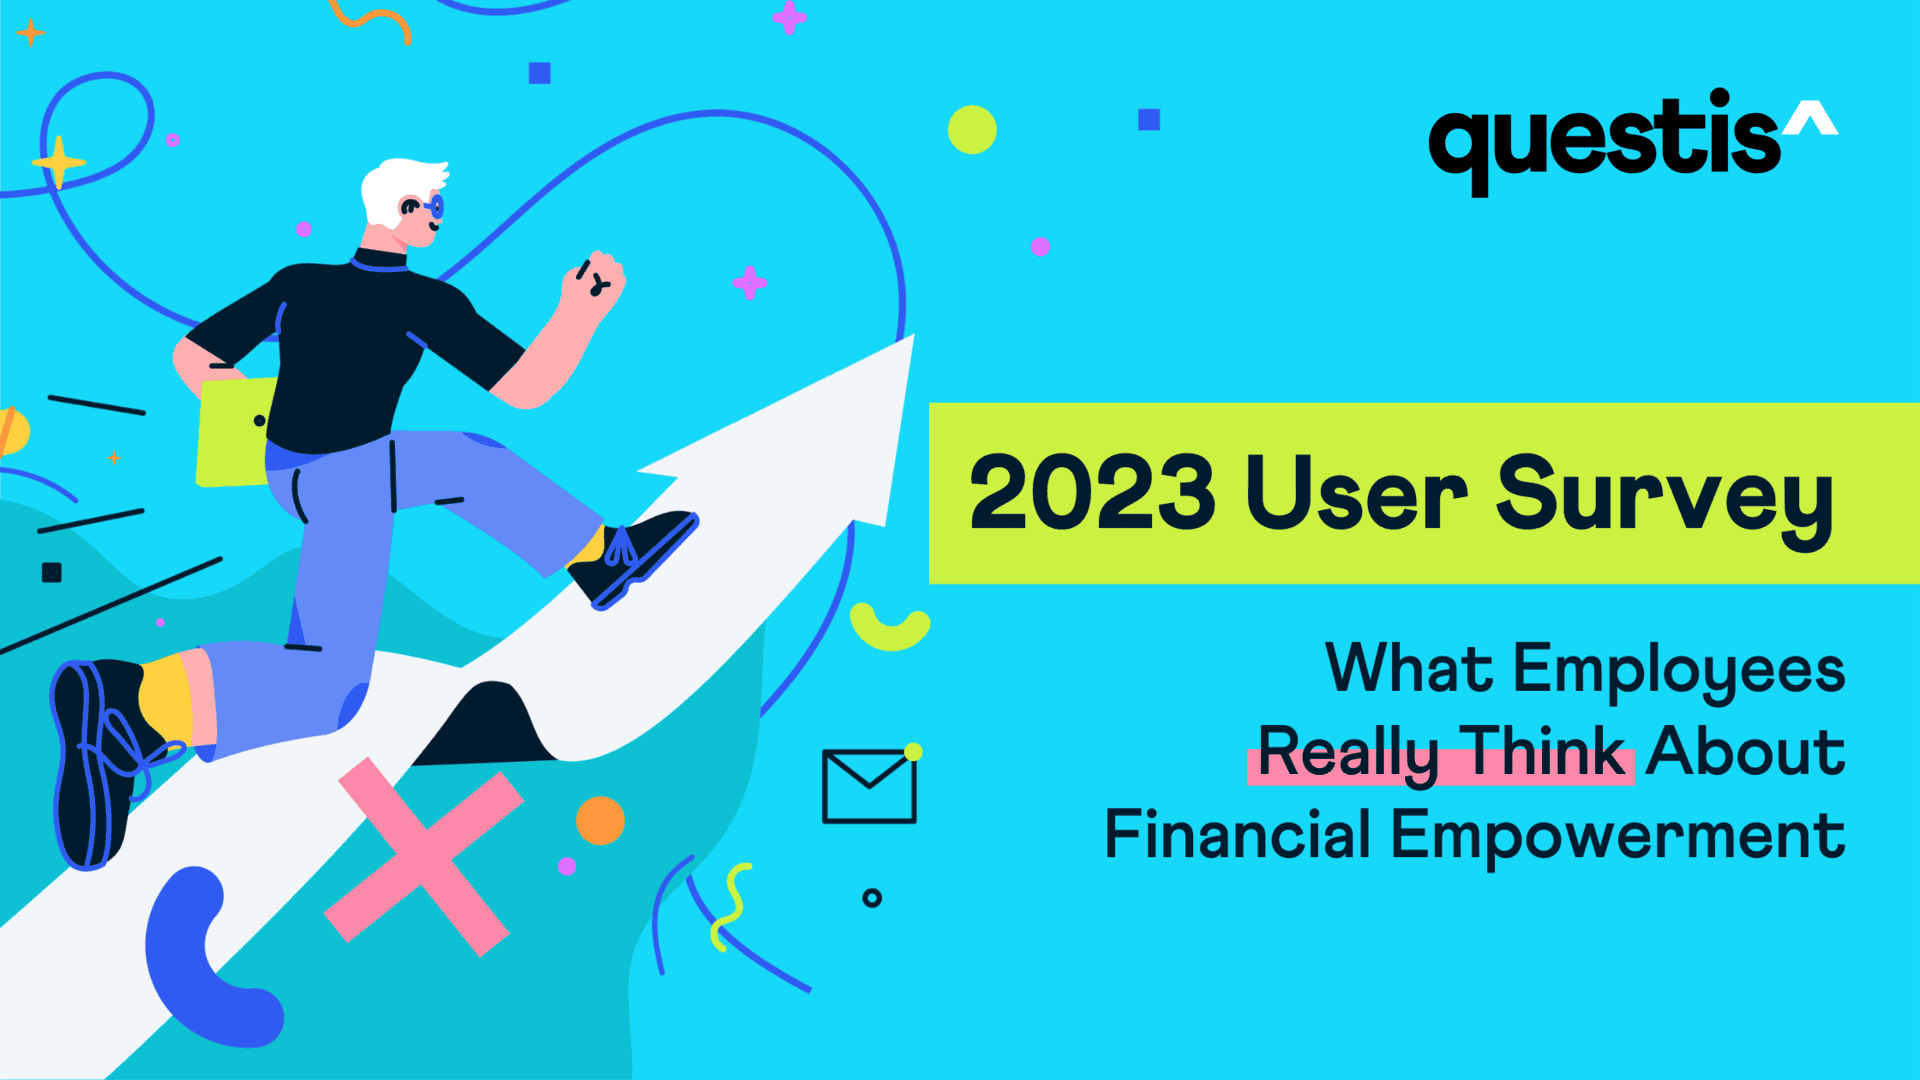 2023 Questis User Survey: What Employees Really Think About Questis